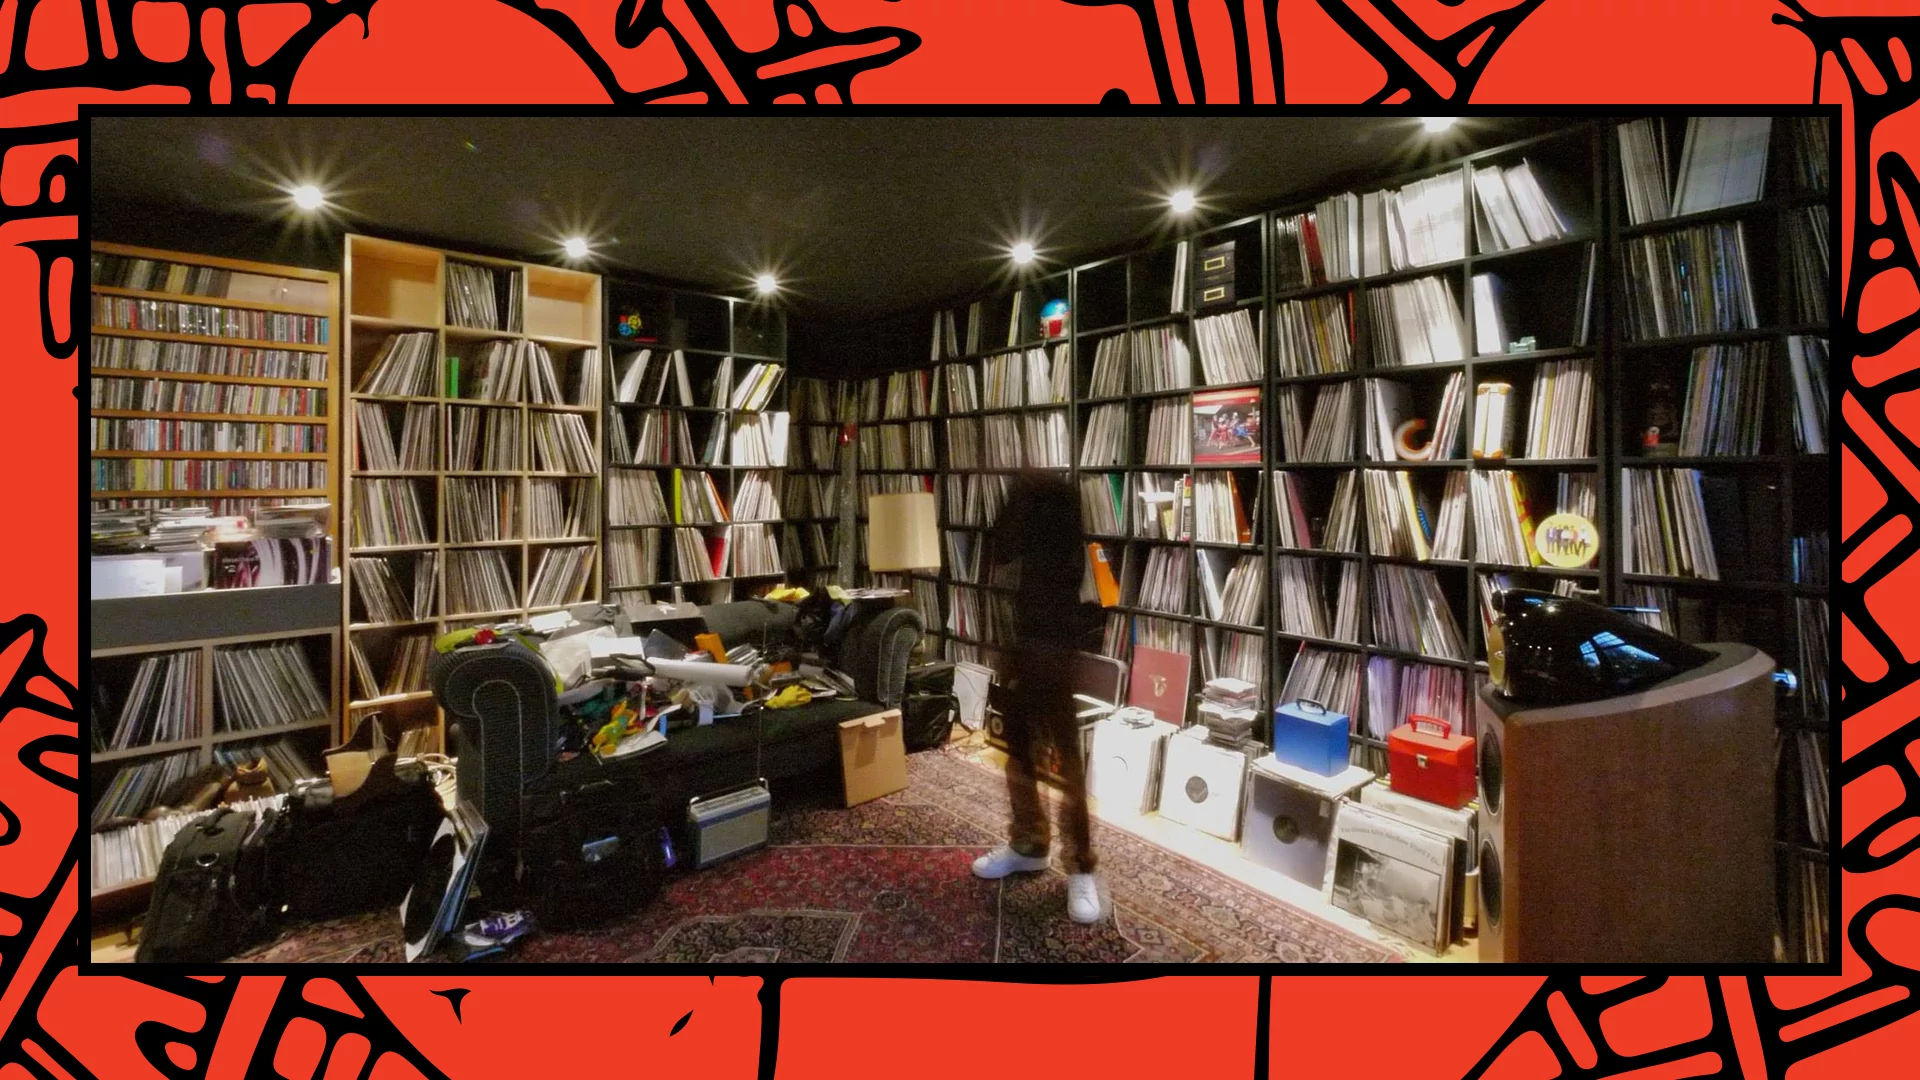 Craig Richards in his studio surrounded by walls of vinyl records